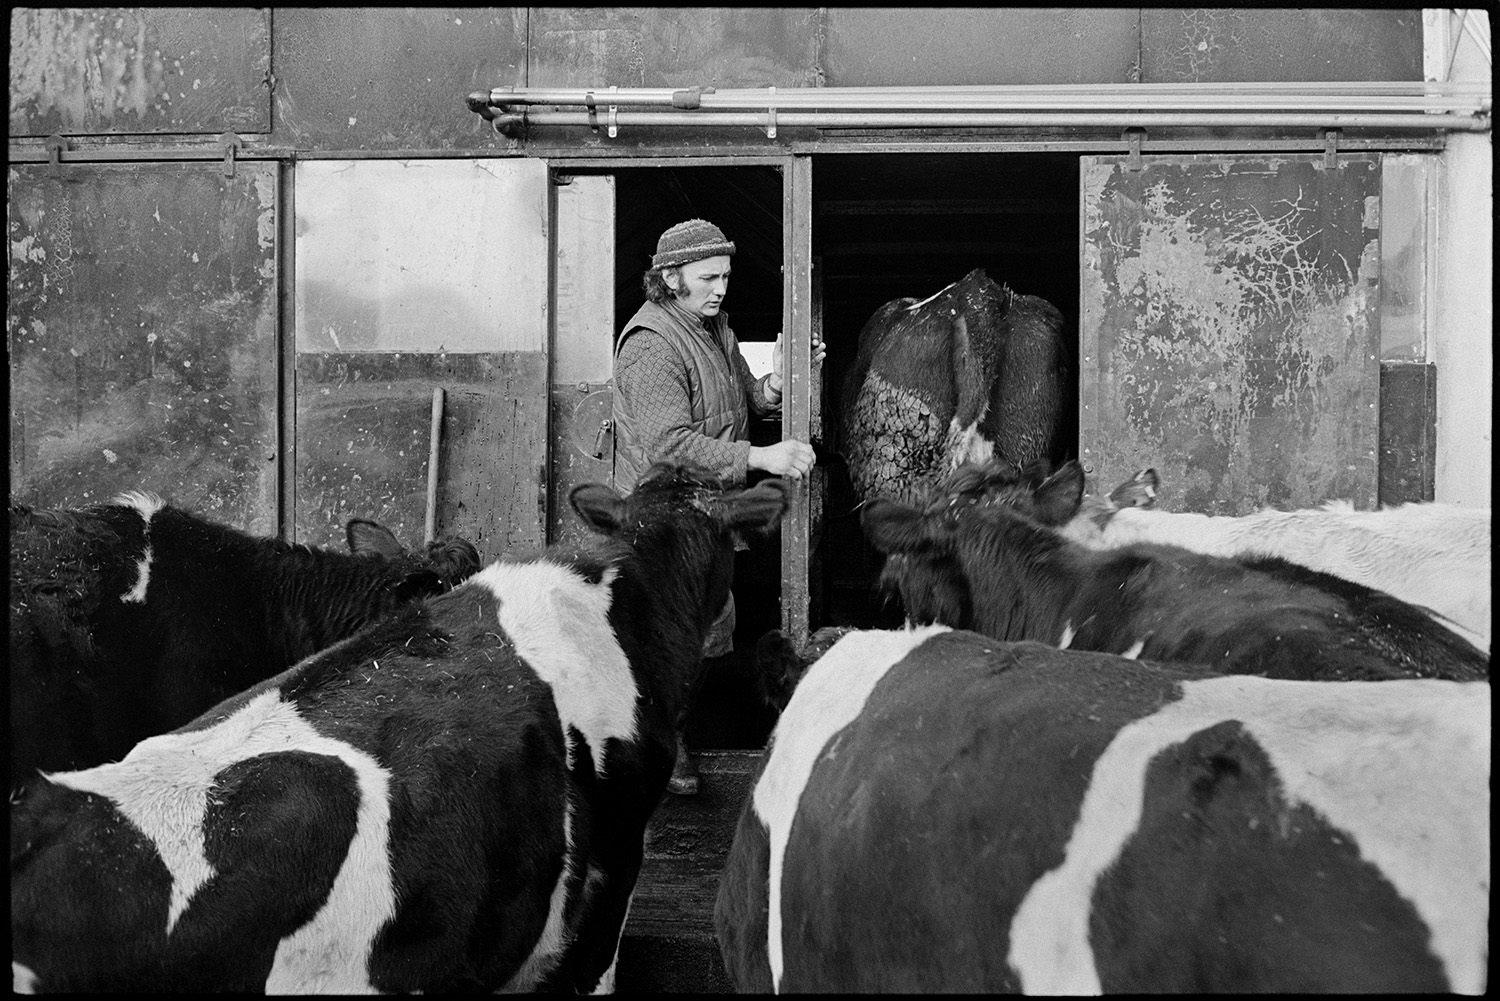 Farmer letting cows into milking parlour. 
[Peter Jones herding cows into a milking parlour at Ridges Farm, Upcott, Dolton. He is wearing a woolly hat.]